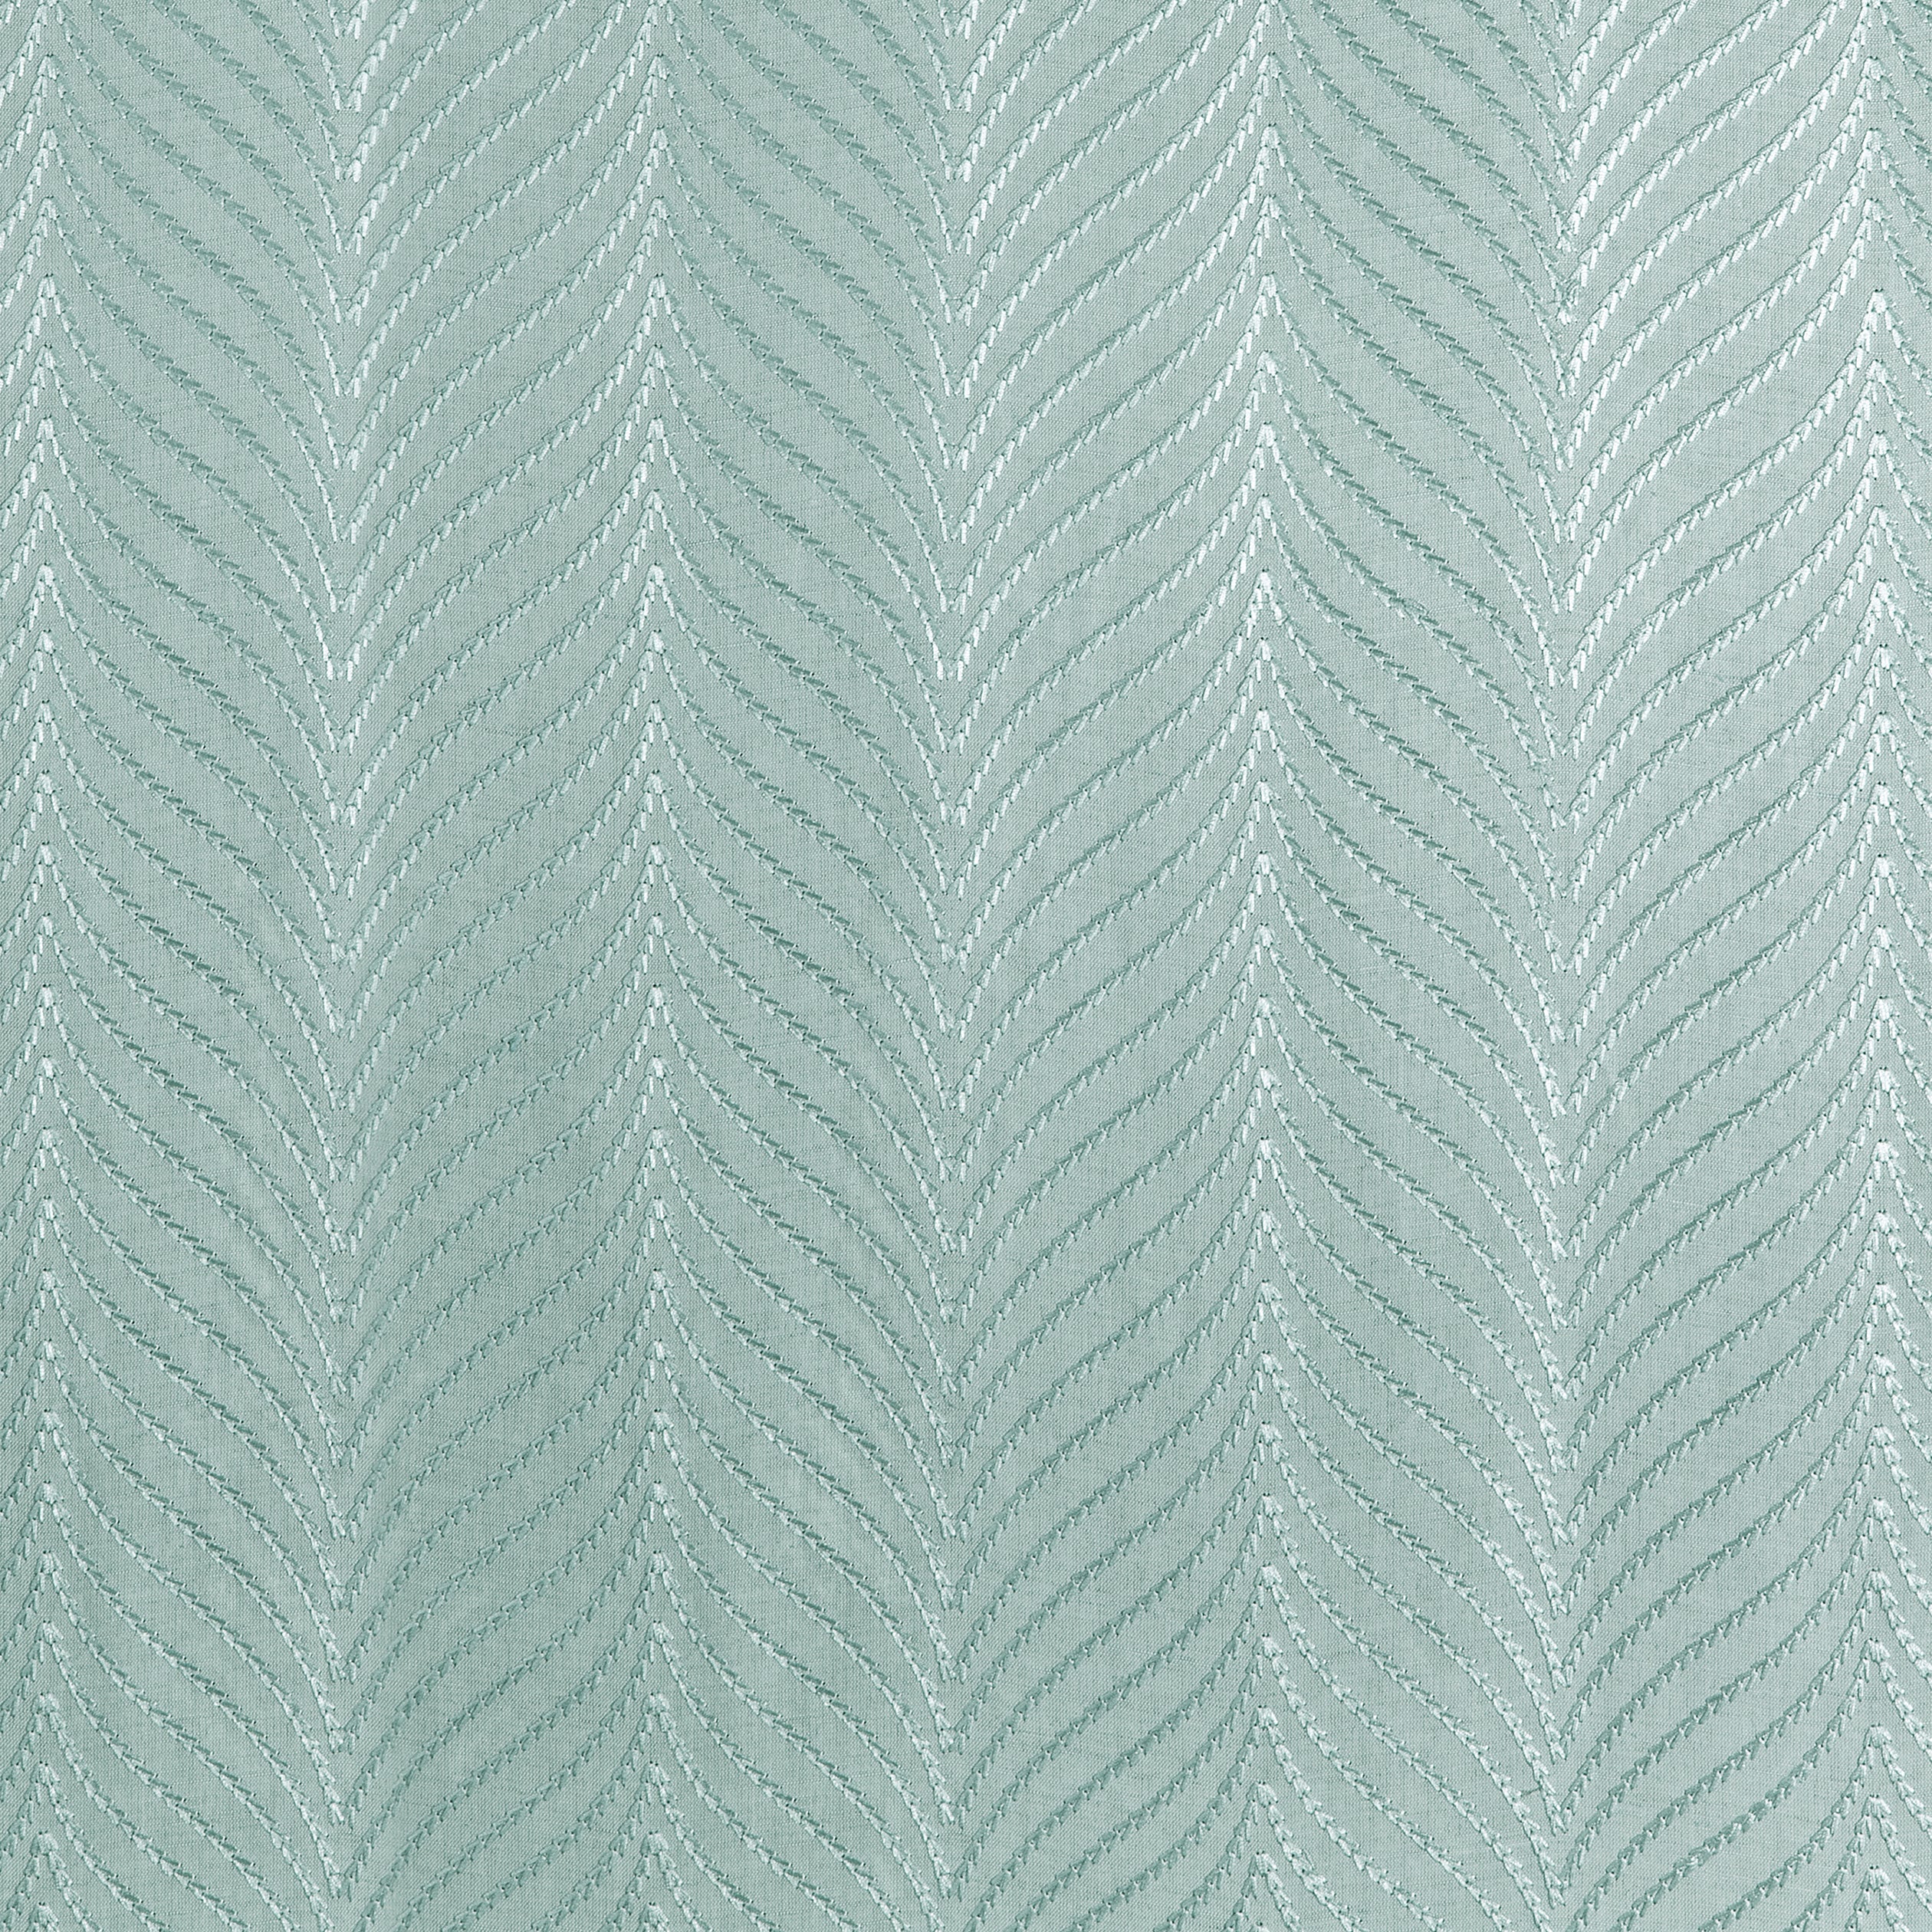 Clayton Herringbone Embroidery fabric in robins egg color - pattern number W775445 - by Thibaut in the Dynasty collection